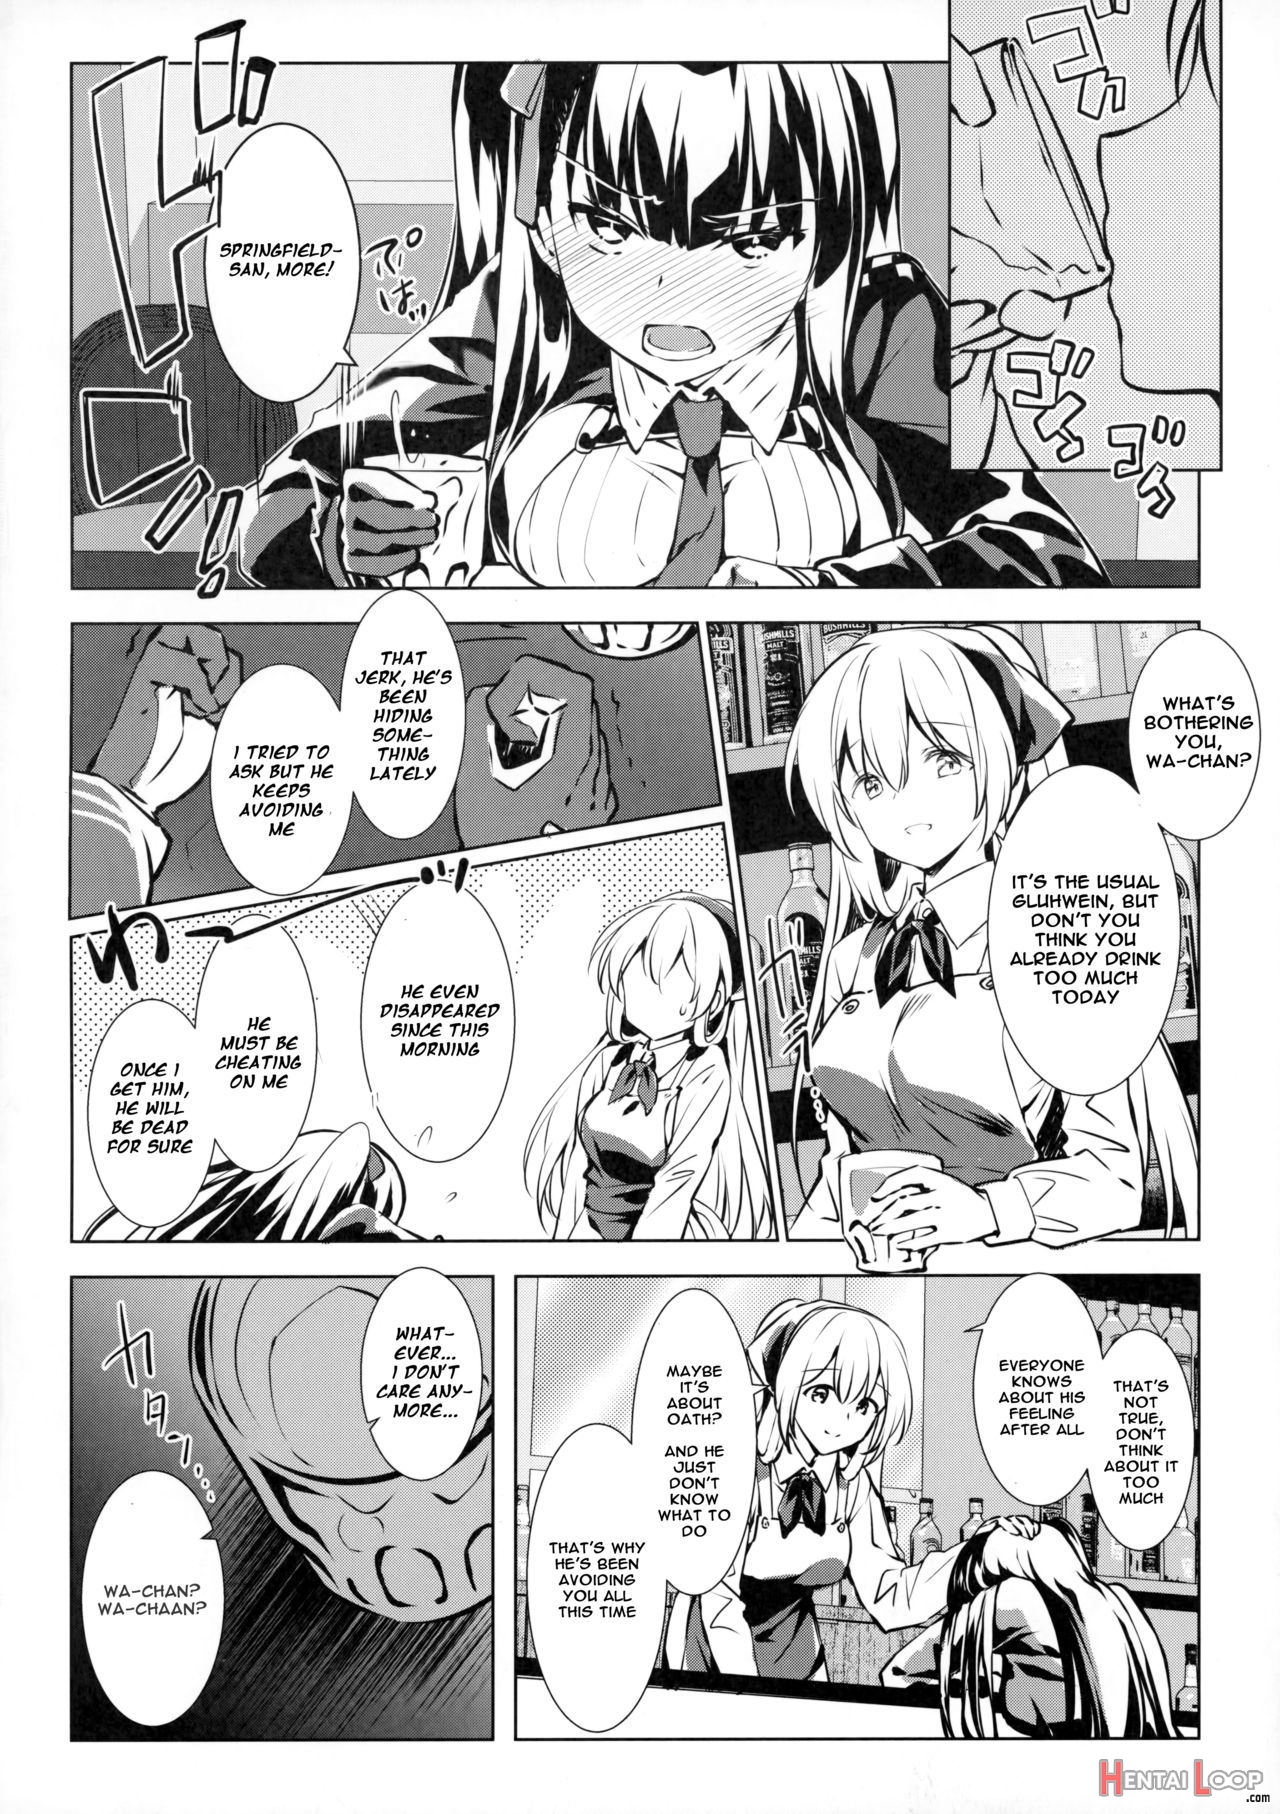 The Honest Wa-chan And The Cowardly Commander page 3